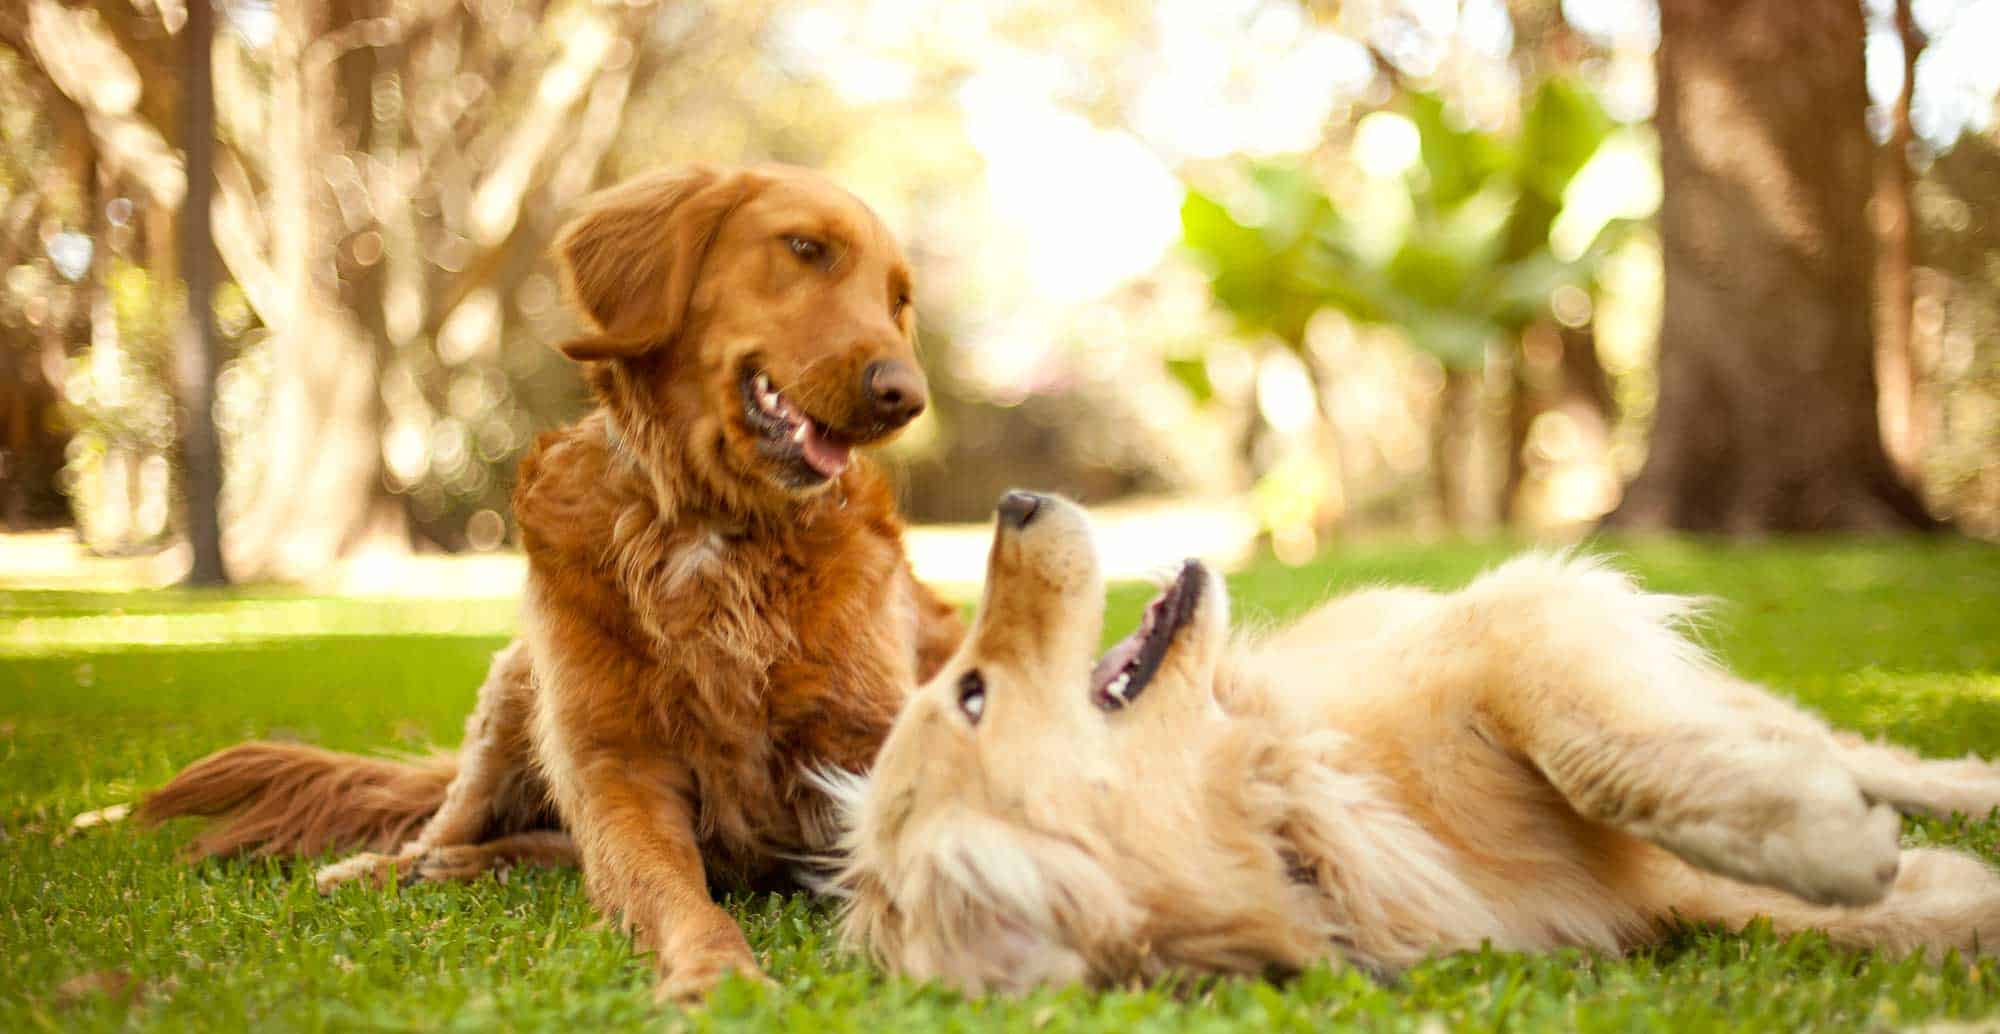 Two golden retrievers rolling in the grass